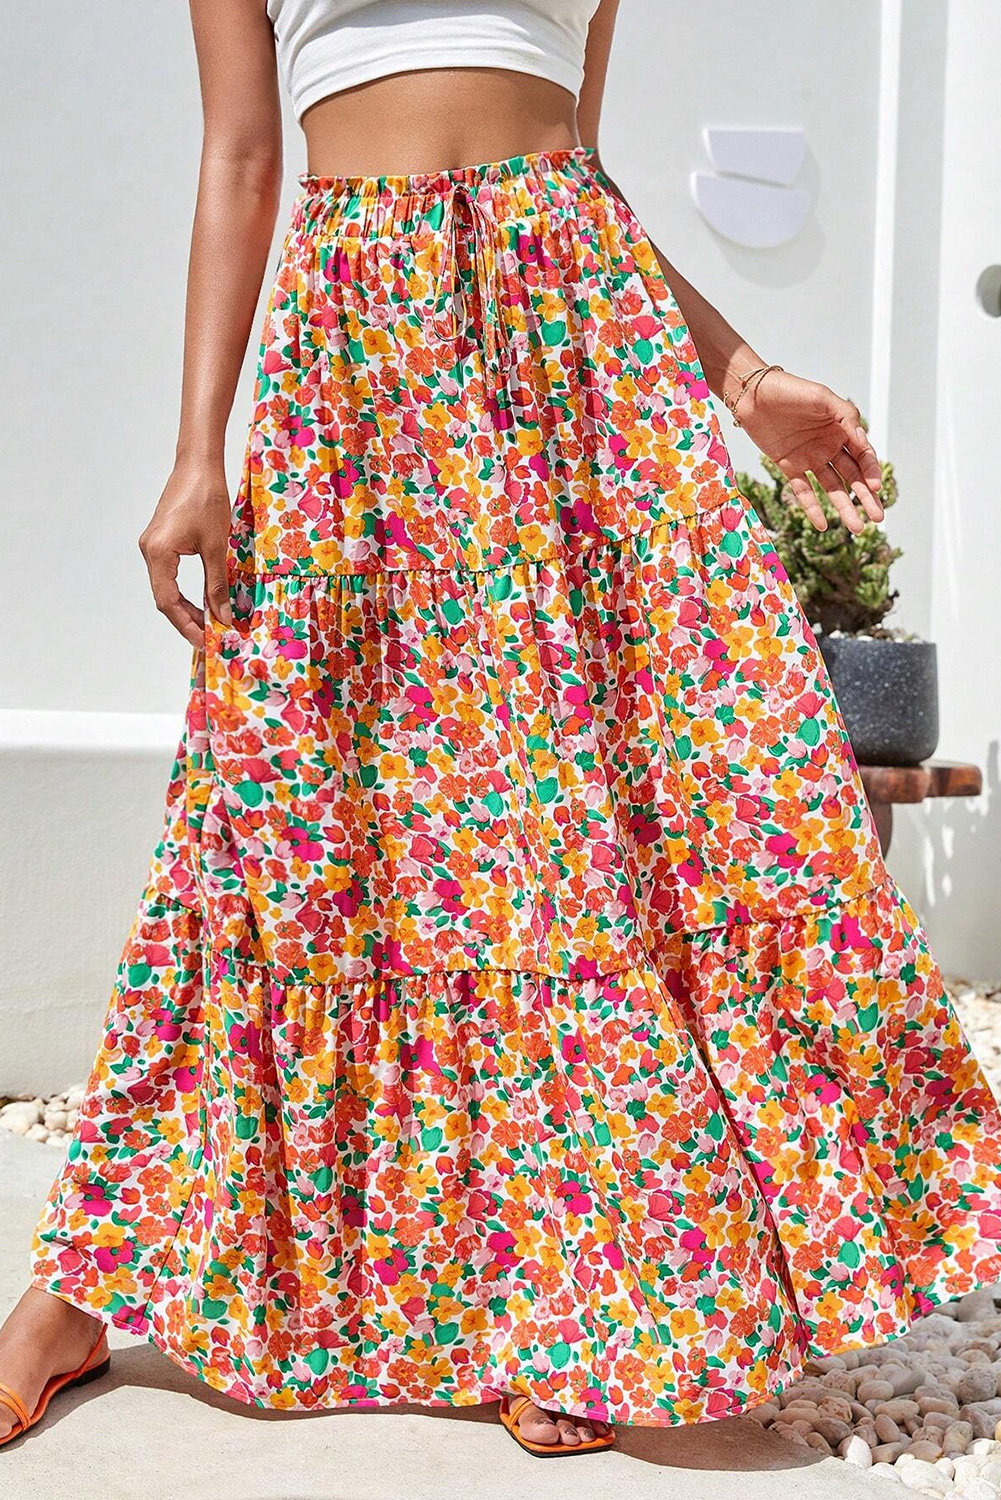 Shewin Wholesale Chic Women Yellow Boho Floral Print Tiered Maxi SKIRT